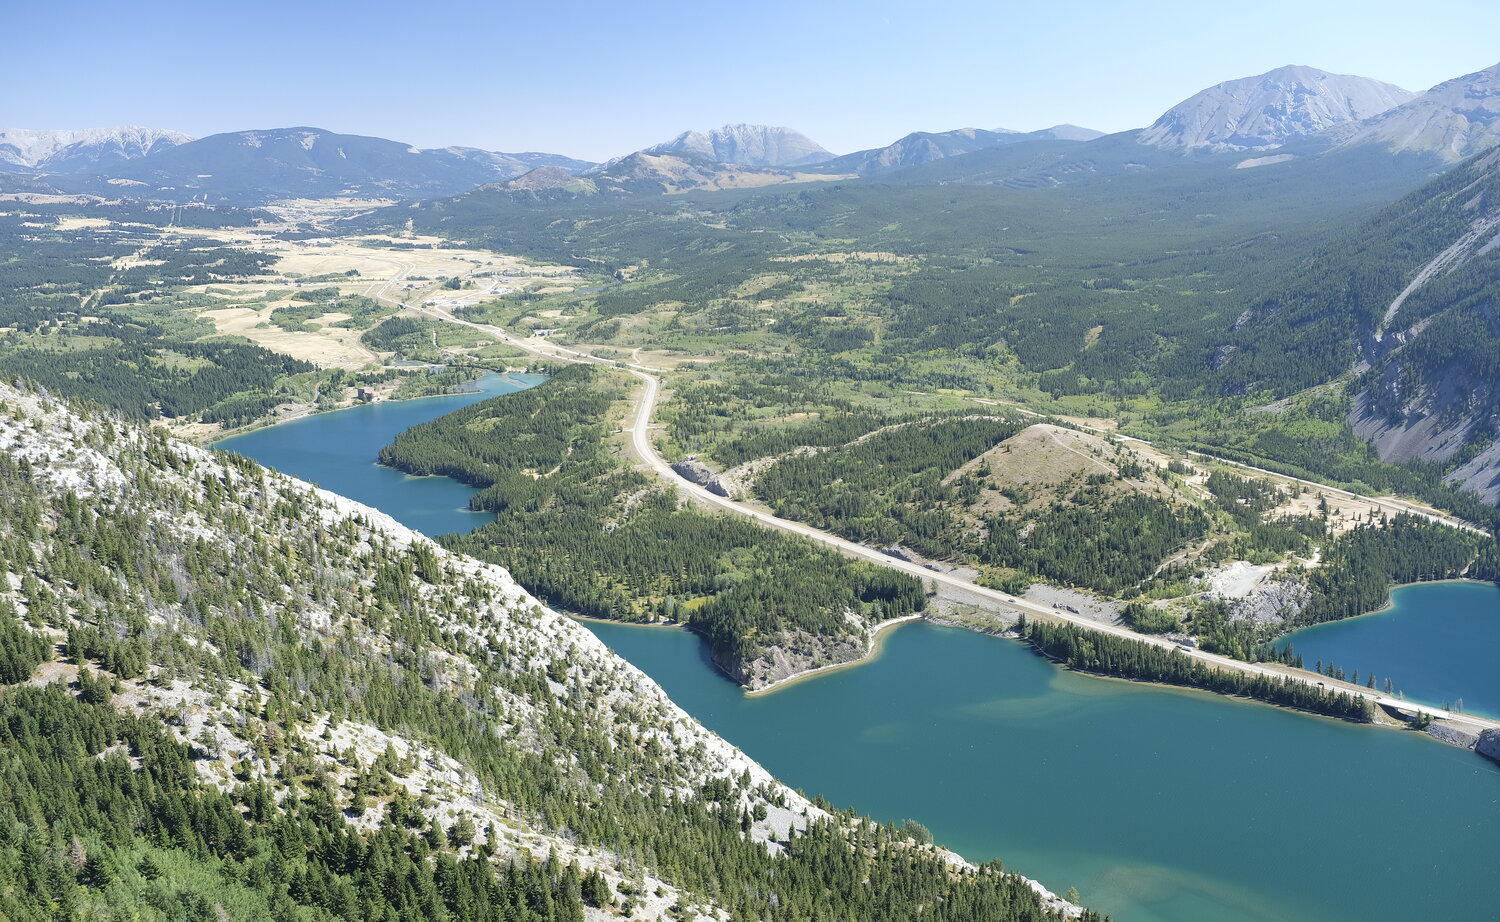 An aerial photo of the entire Crowsnest Pass community, looking out over Crowsnest Lake and a slope of limber pine trees.